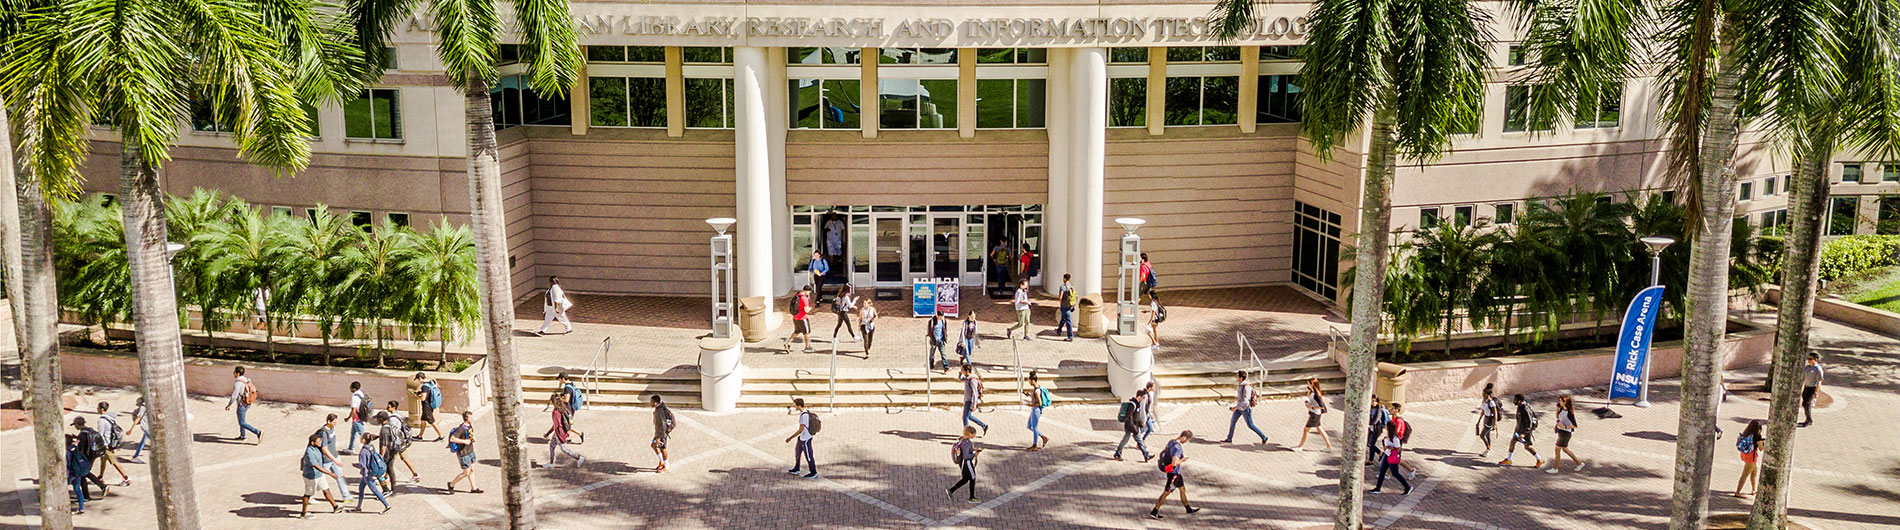 nsu library and information technology building